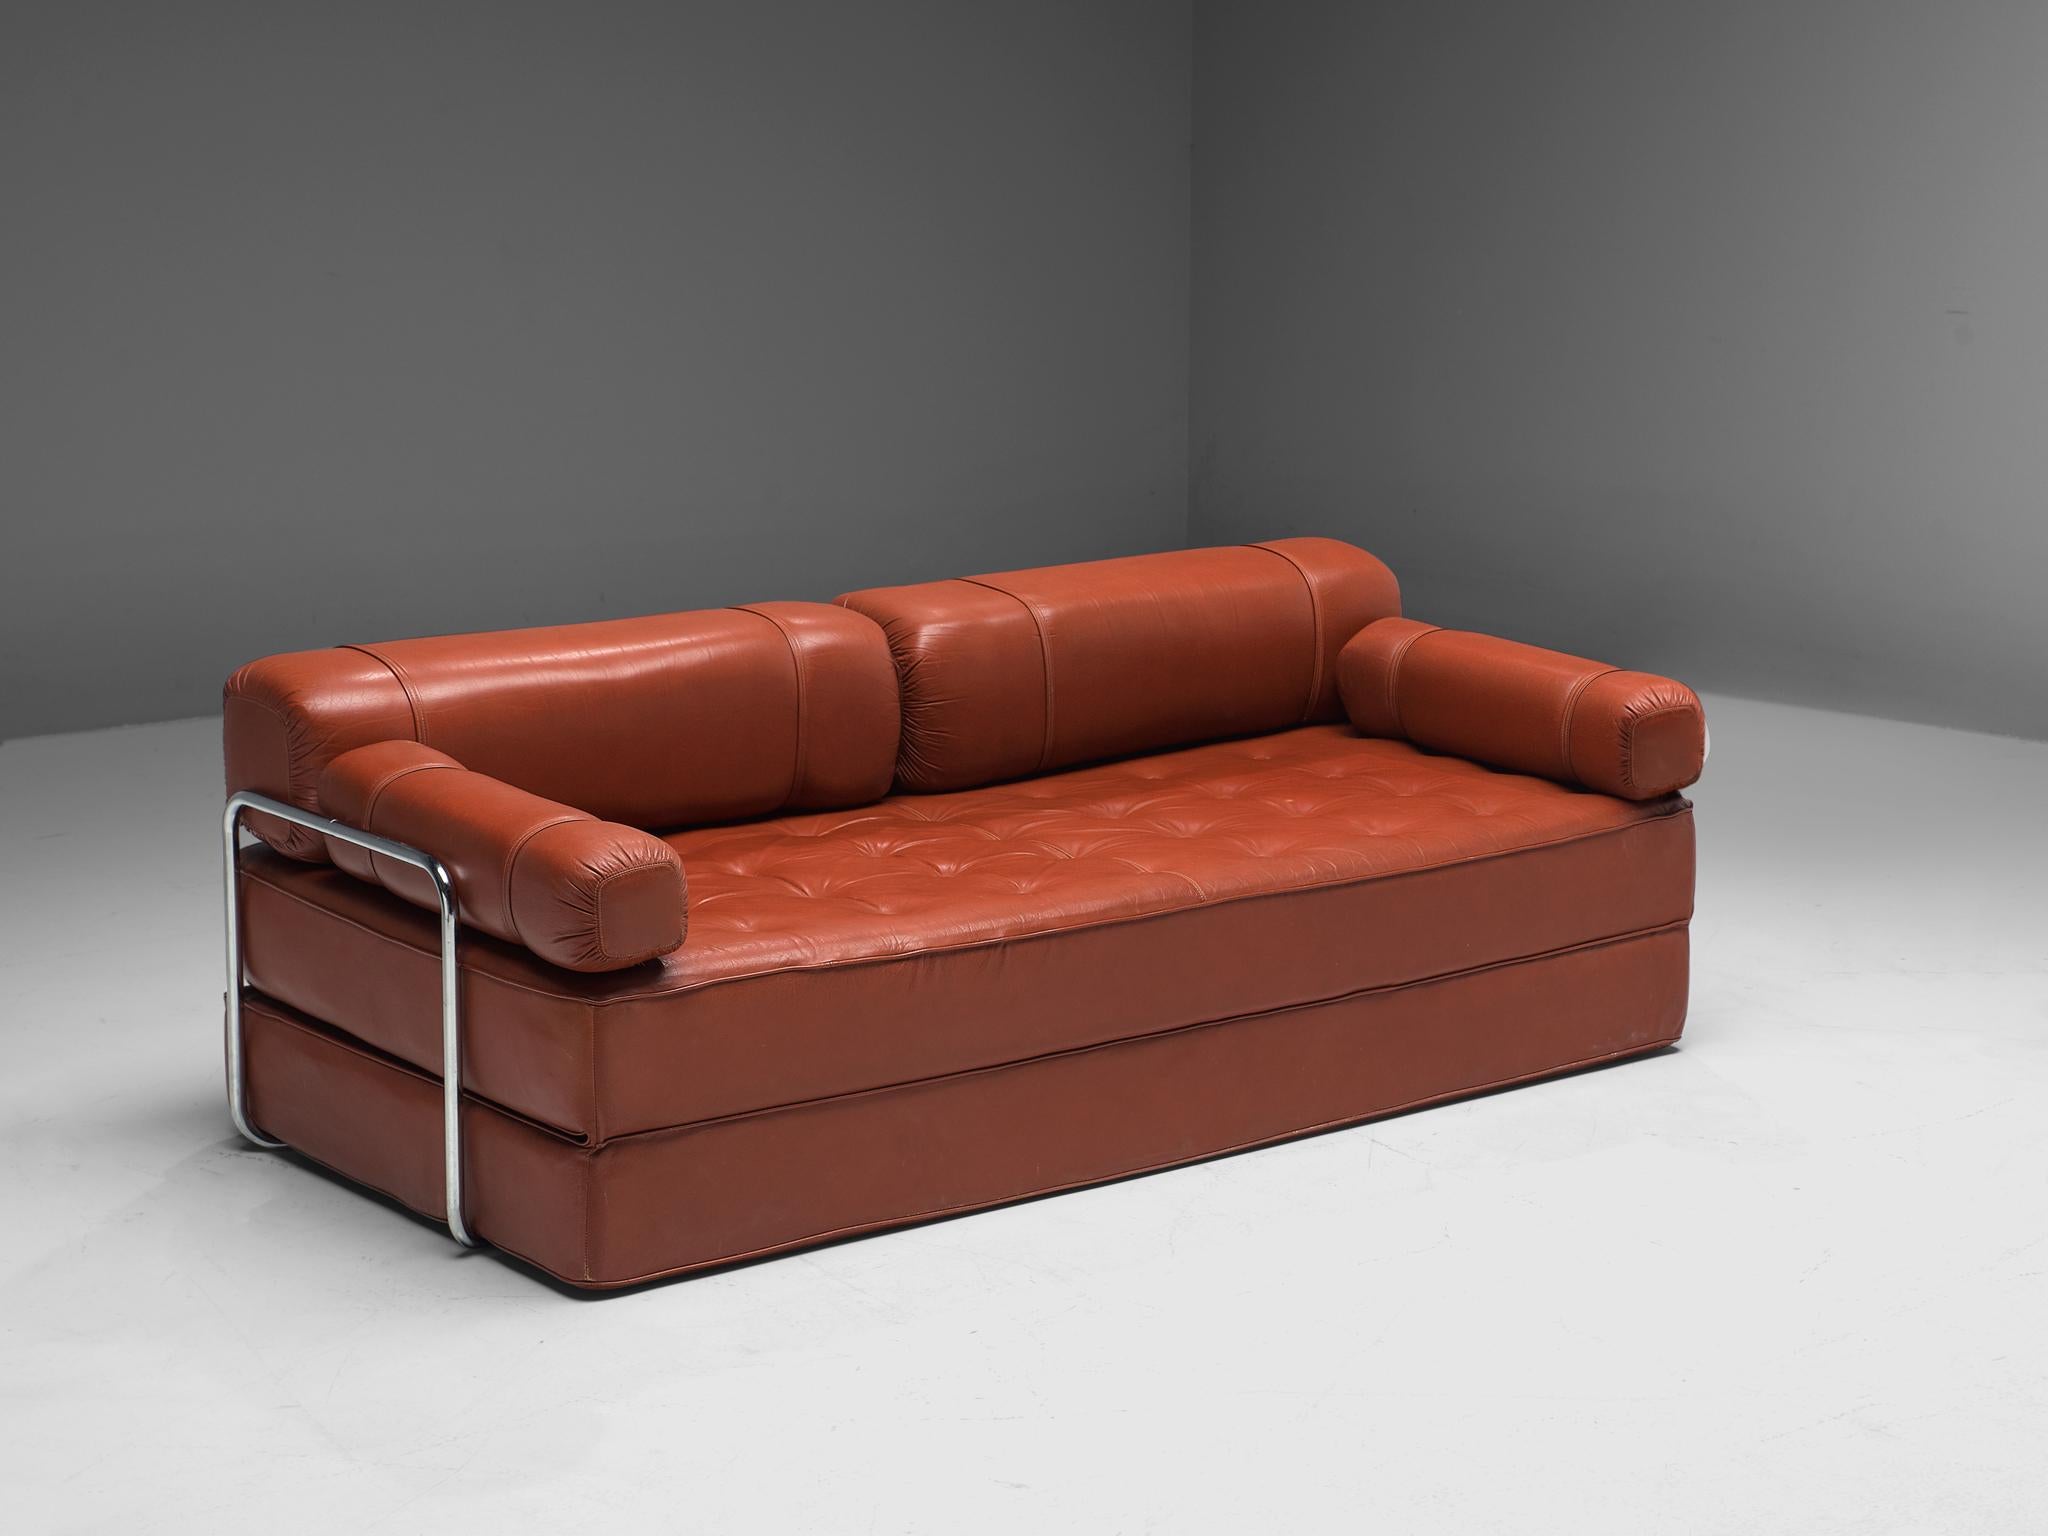 Sofa or fold out bed, leather and chromed metal, Europe, 1970s.

Lovely postmodern sofa in leather designed in Europe in the 1970s. This is a versatile piece, since it can easily be unfolded into a double bed as well. The seat consists of parts